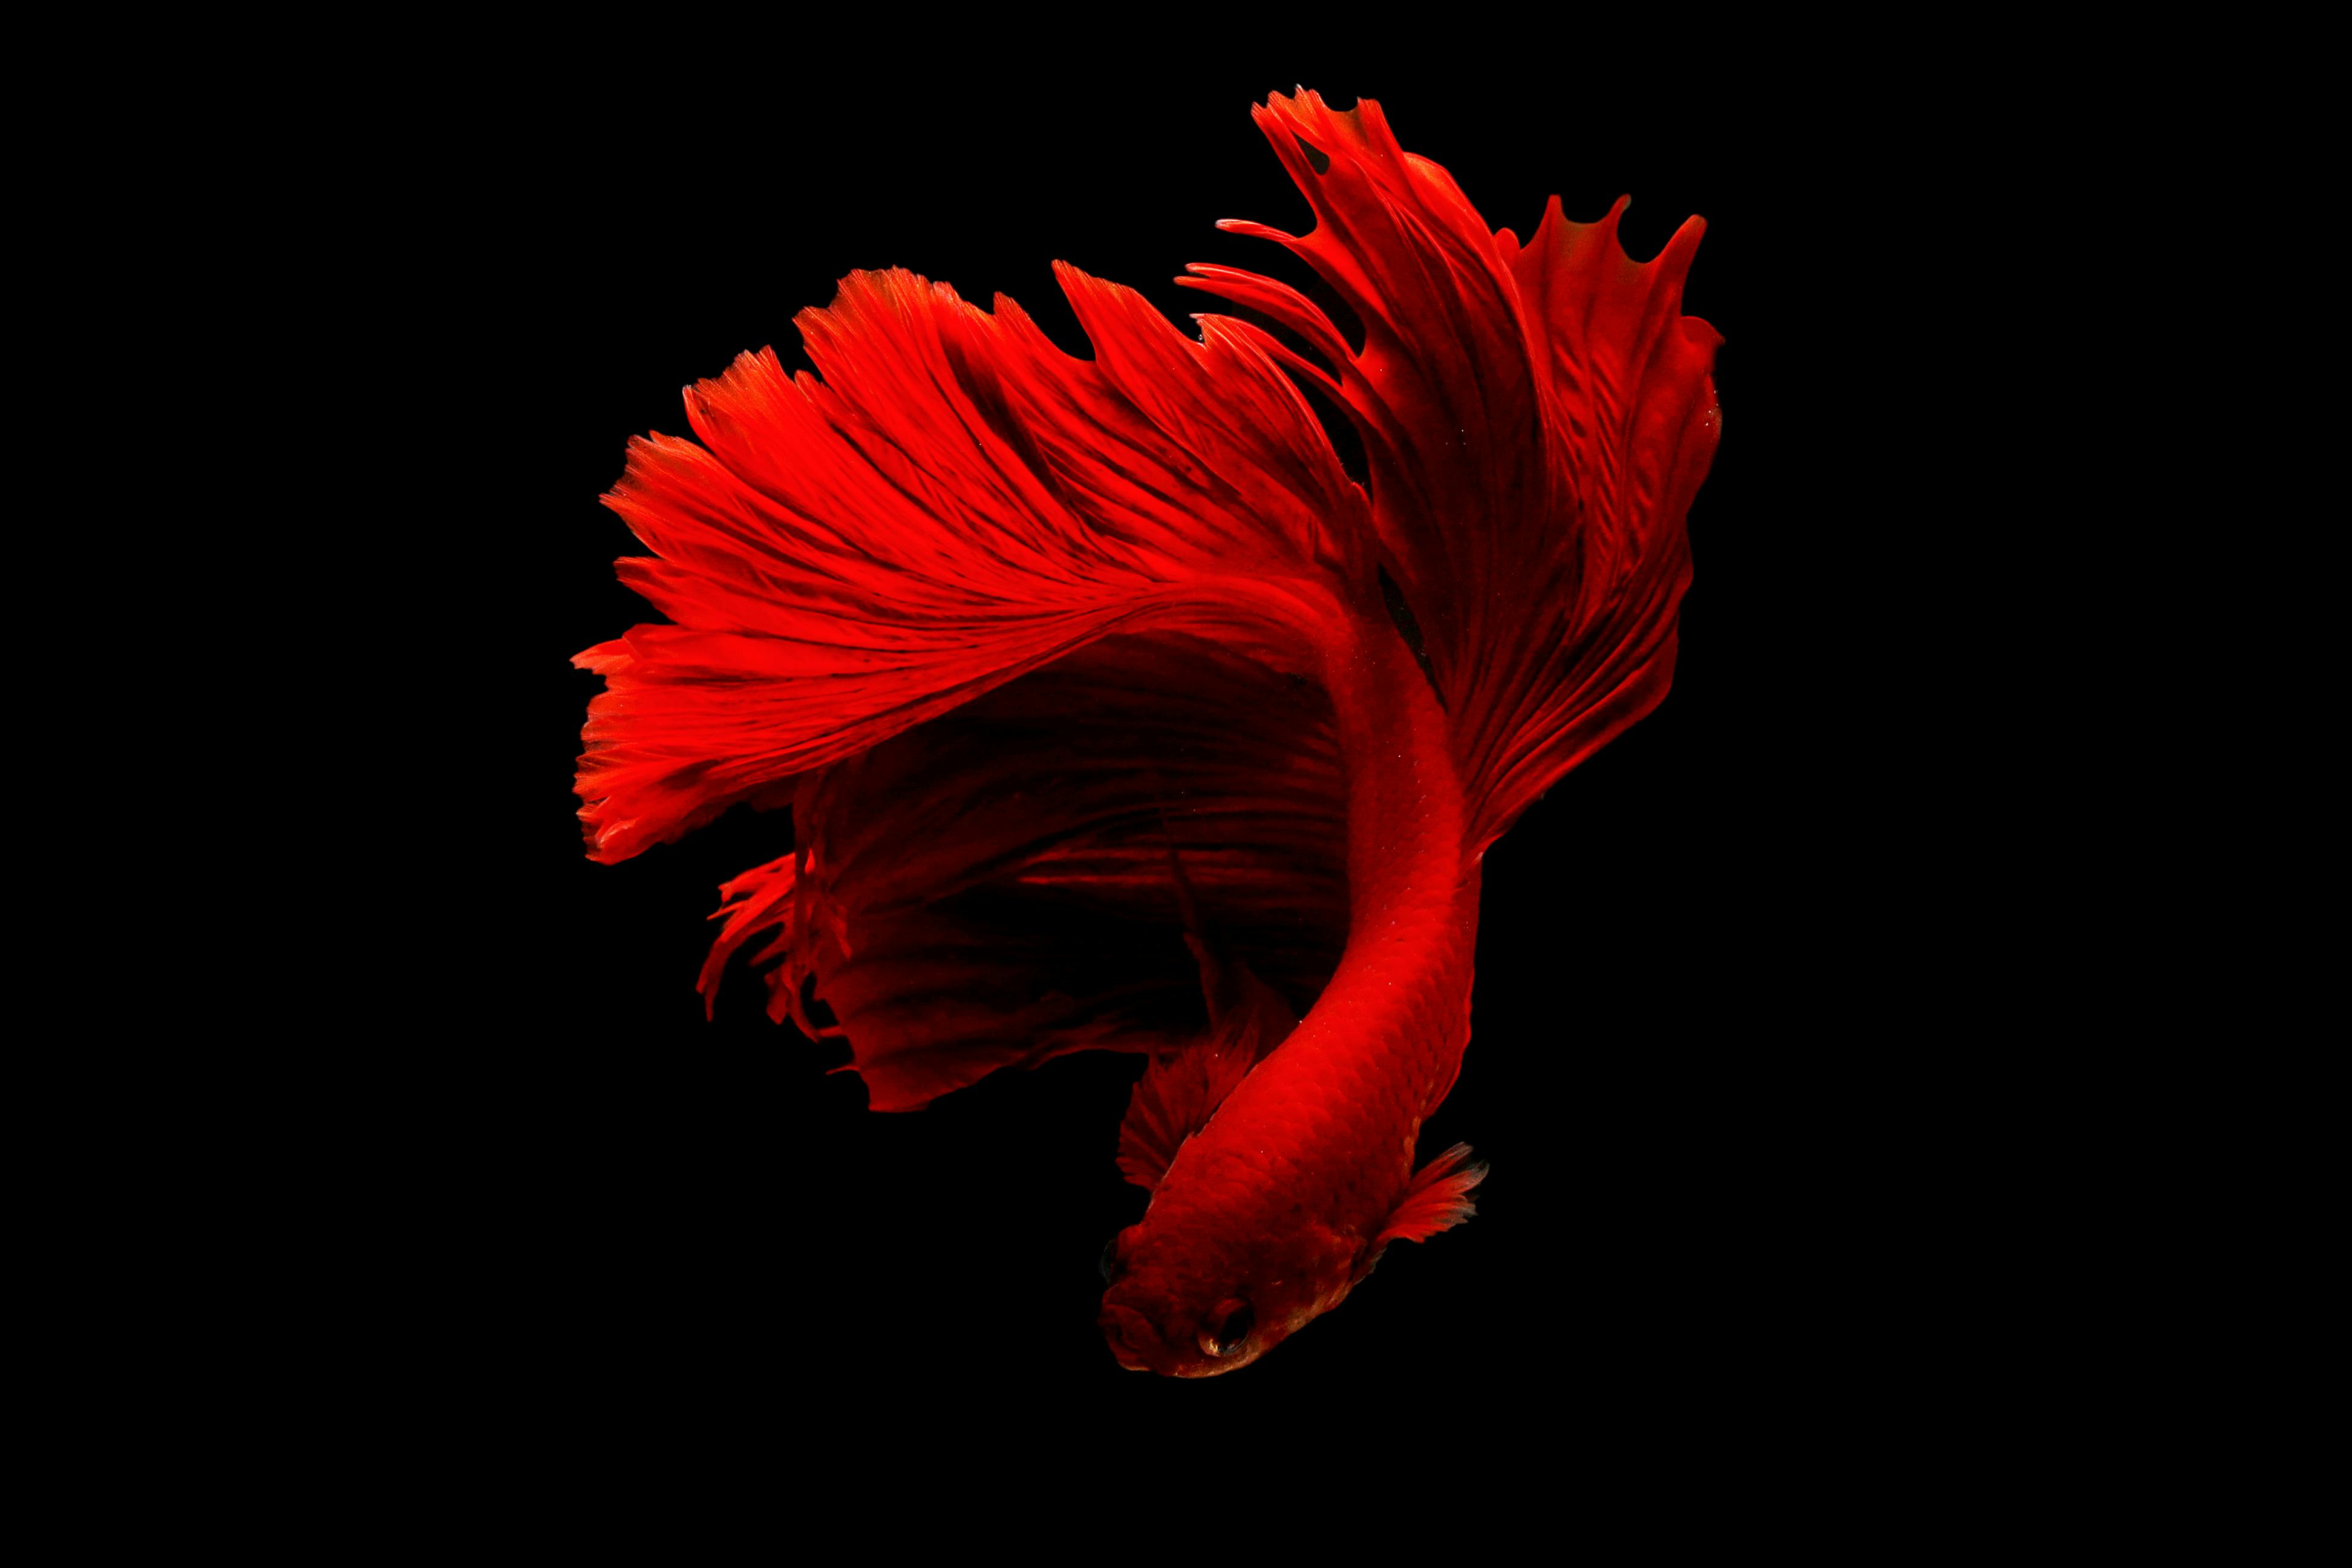 Fish full hd, hdtv, fhd, 1080p wallpapers hd, desktop backgrounds 1920x1080  downloads, images and pictures